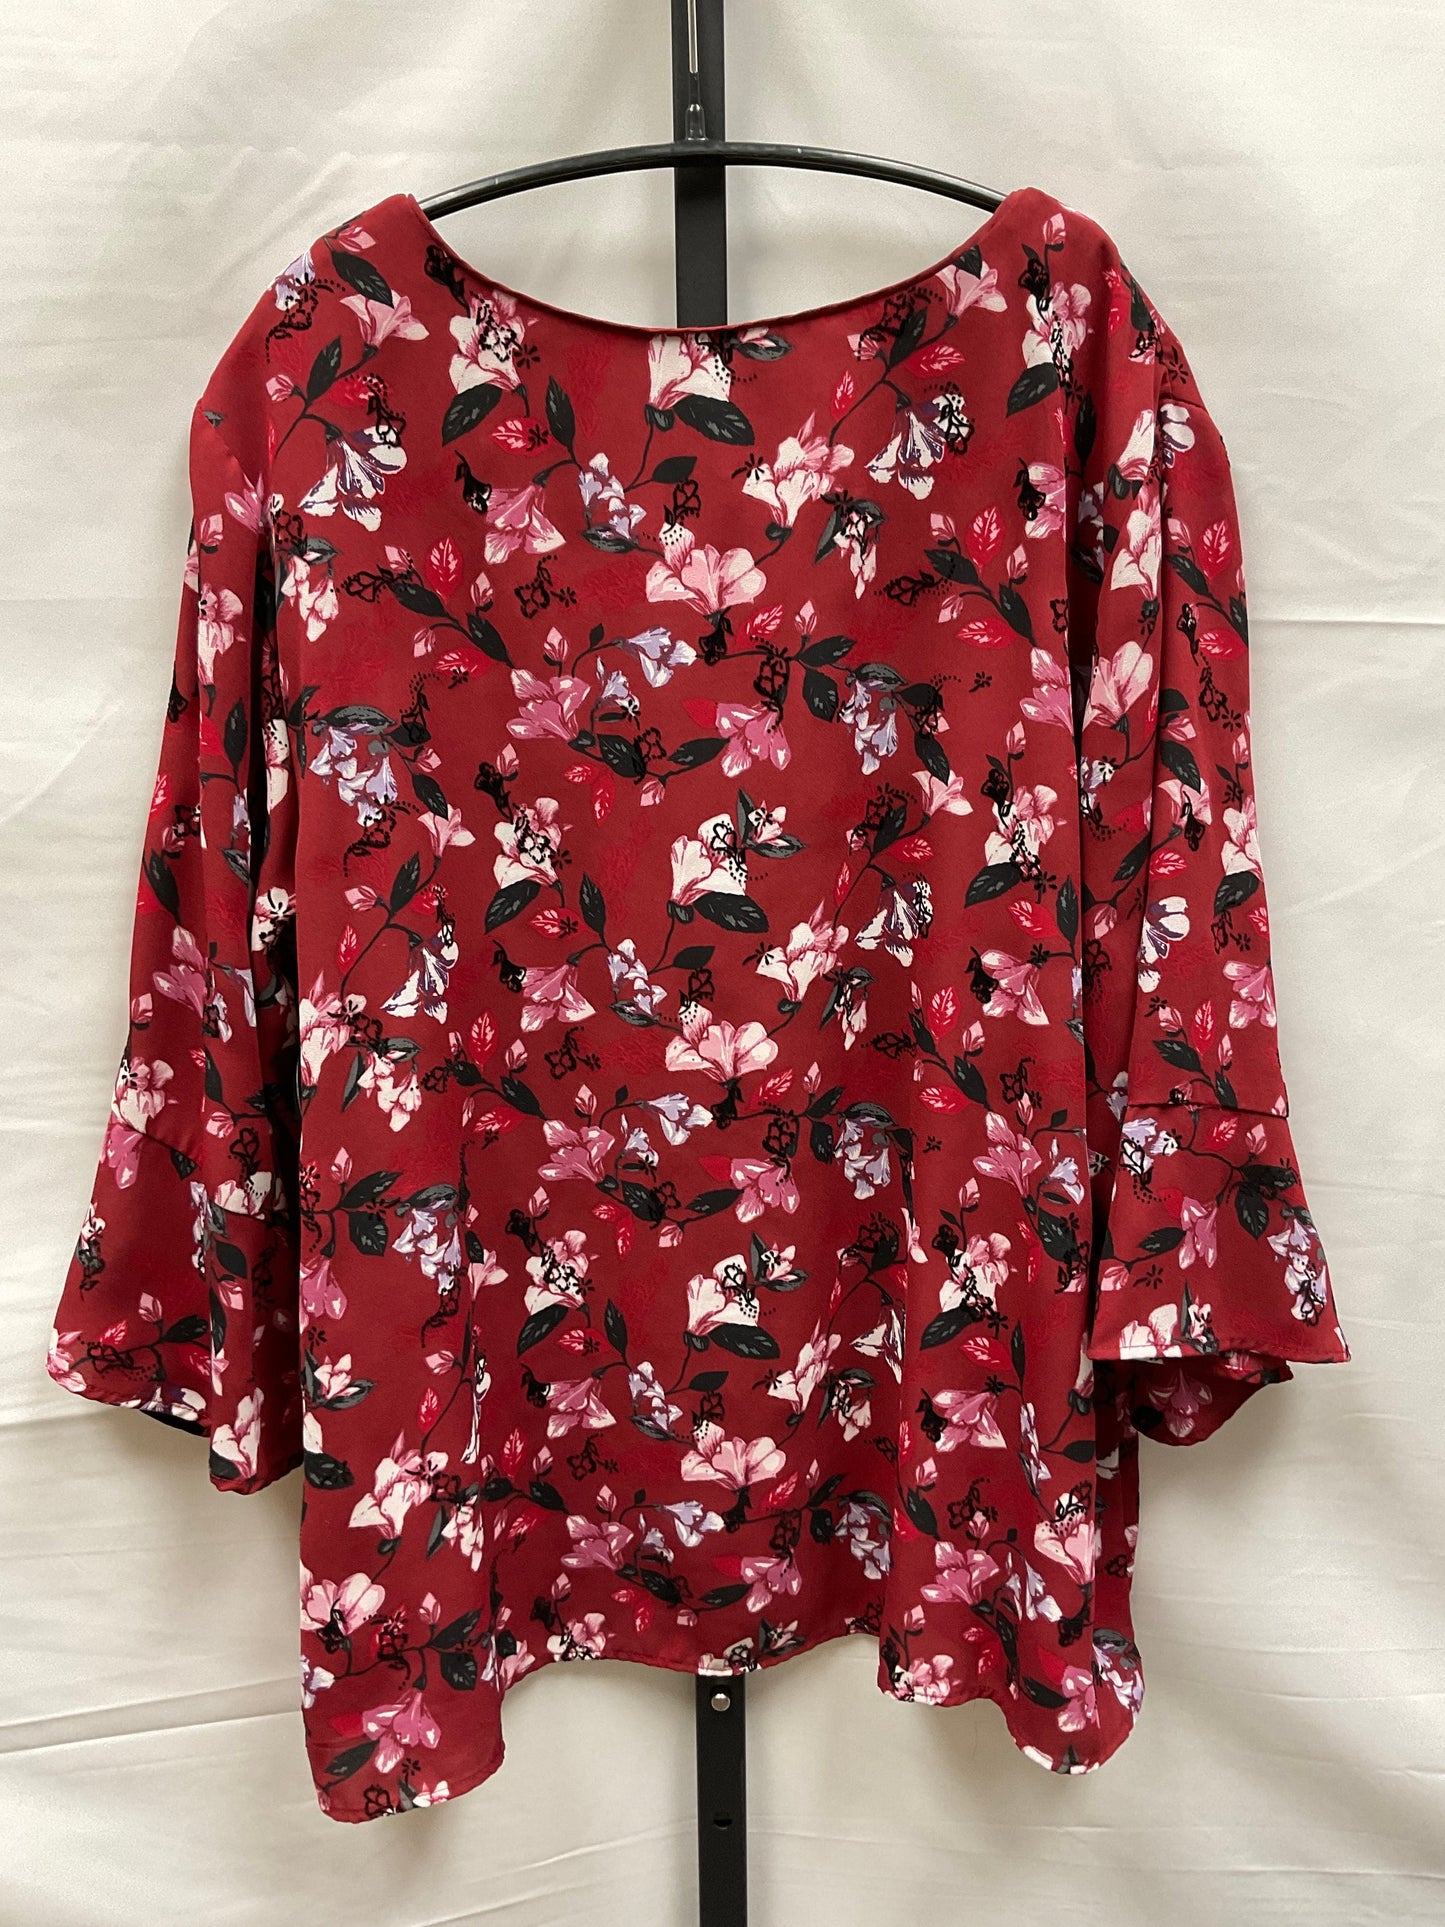 Floral Print Top Long Sleeve Christopher And Banks, Size Xl